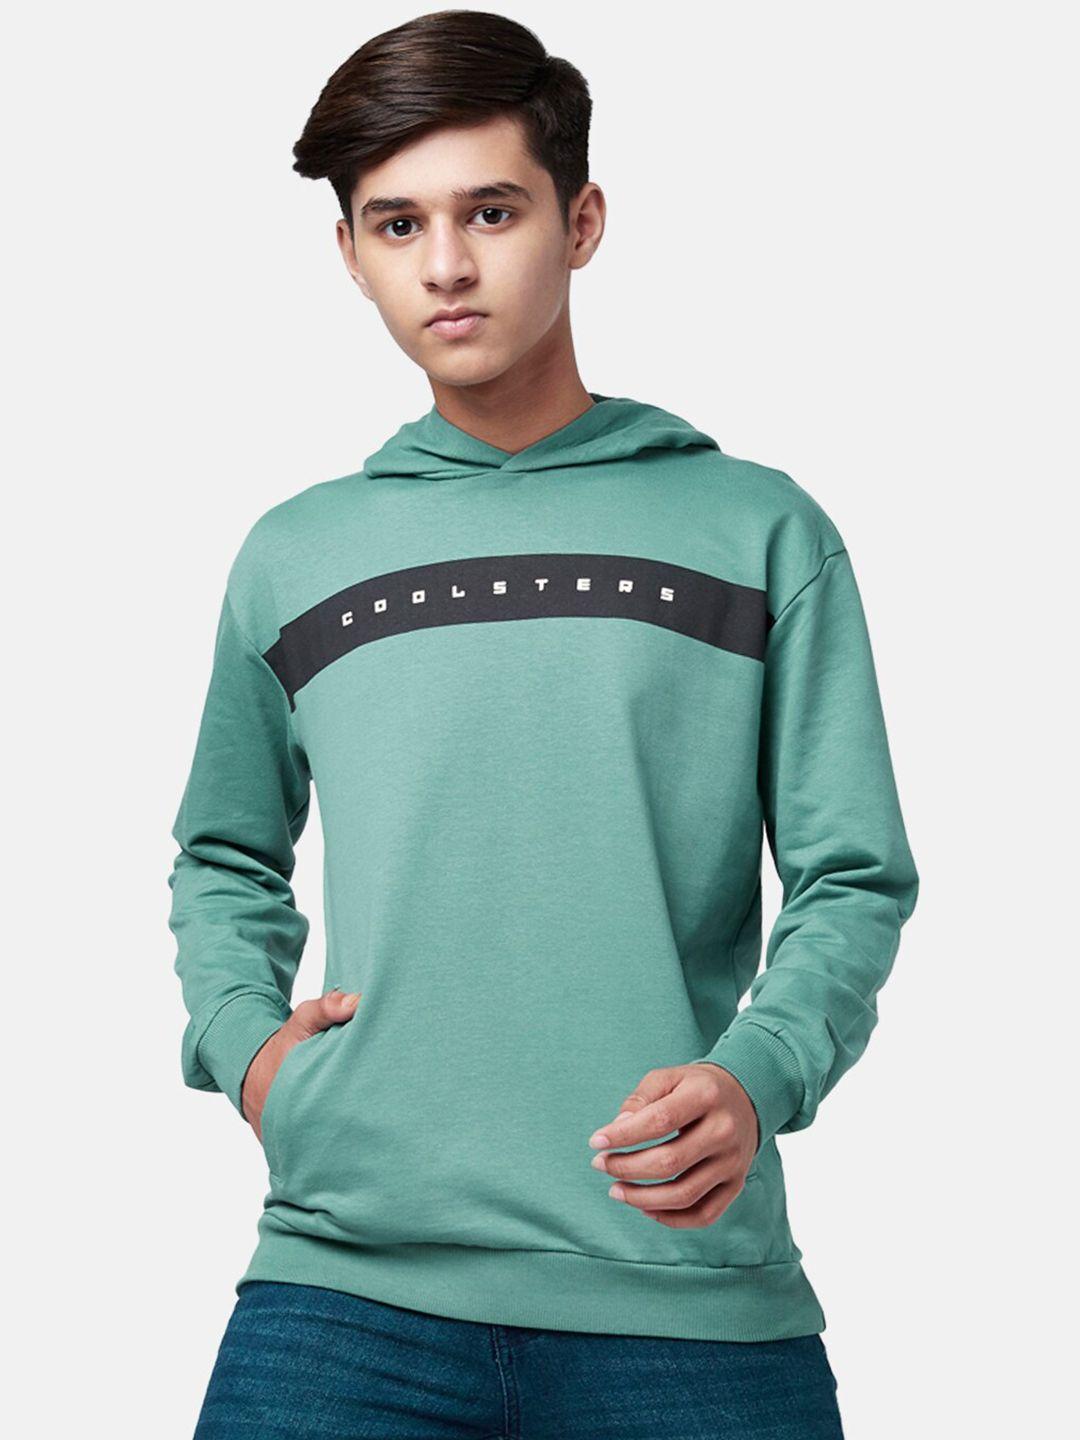 coolsters by pantaloons boys green printed hooded cotton sweatshirt